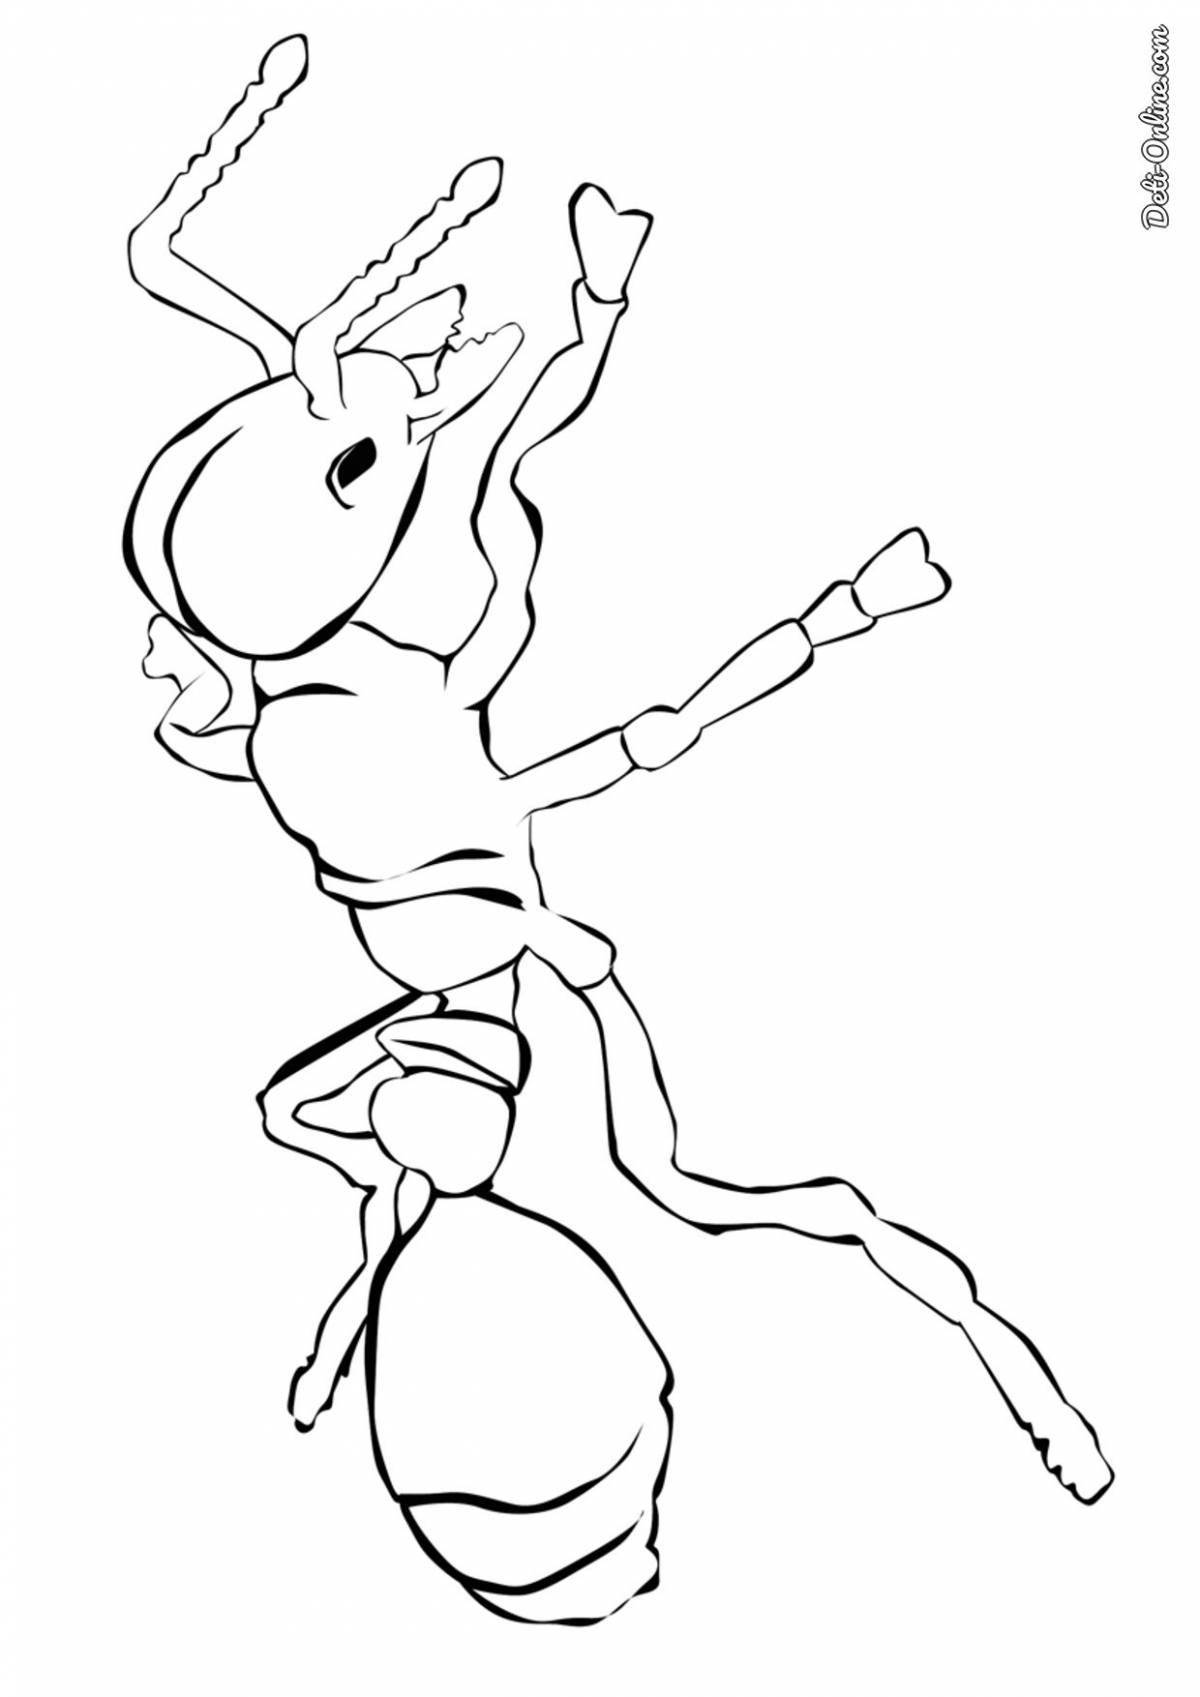 Charming ant drawing